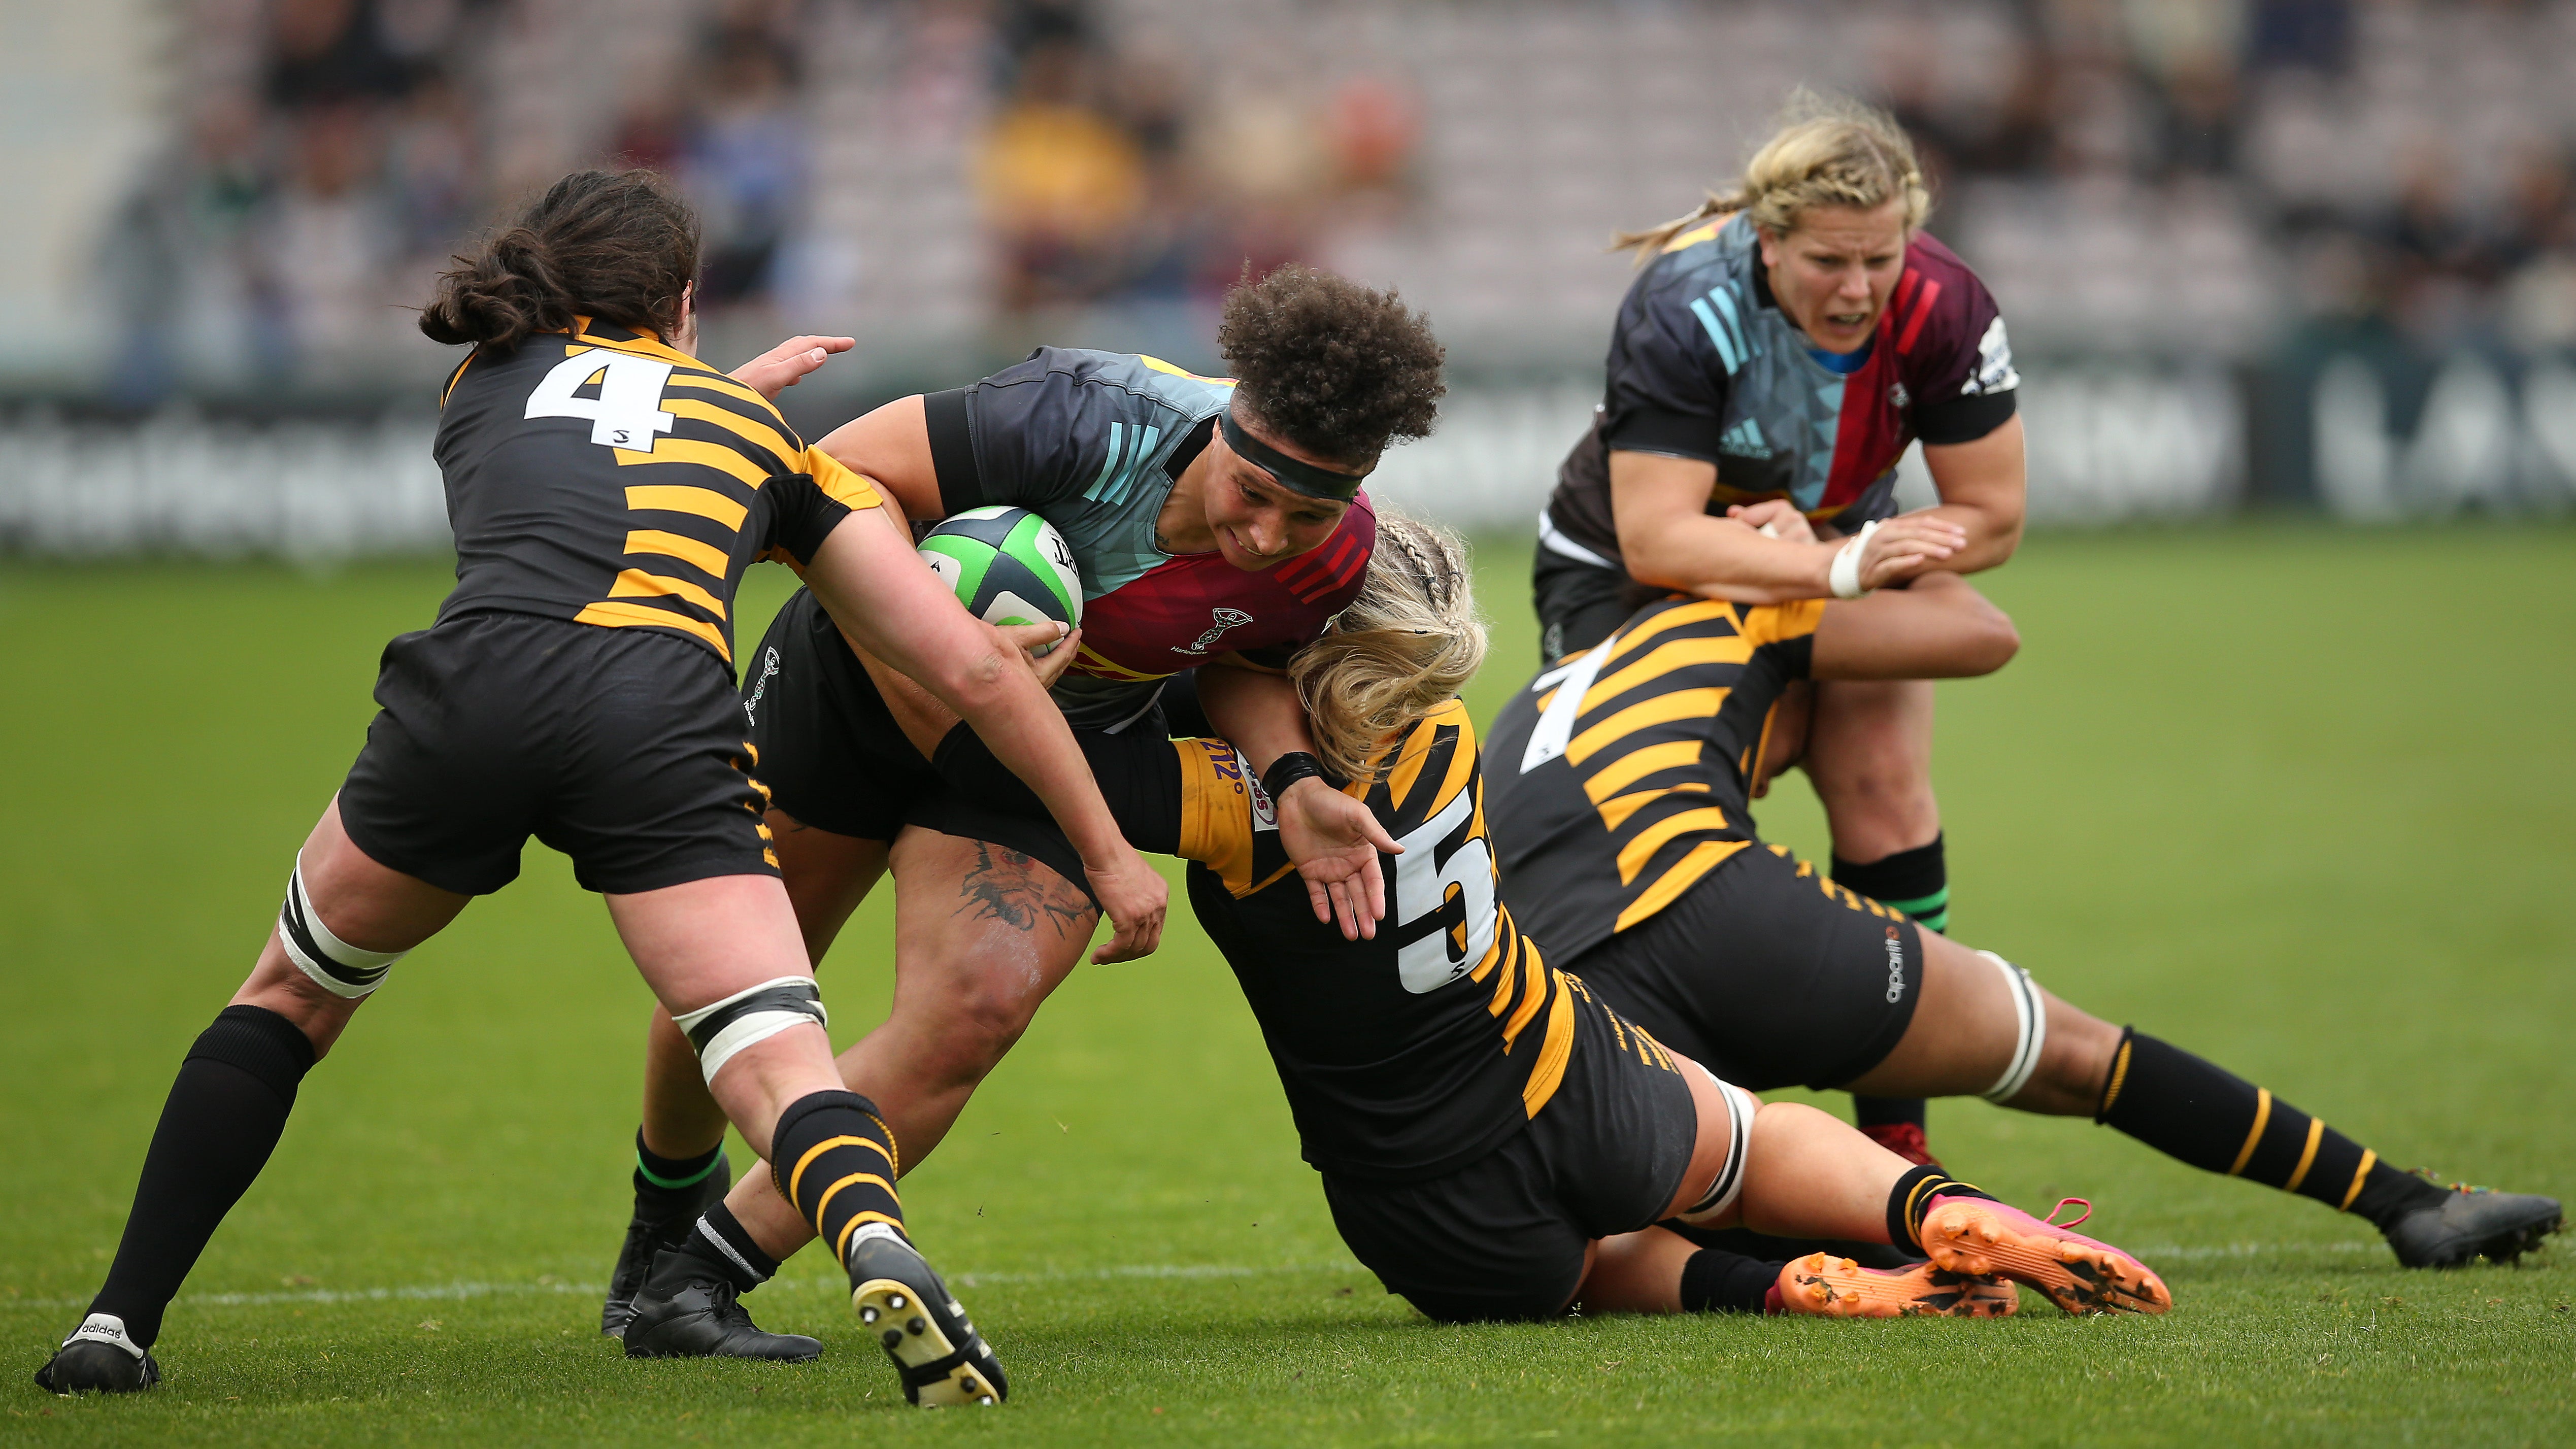 Quins will play Wasps at Twickenham